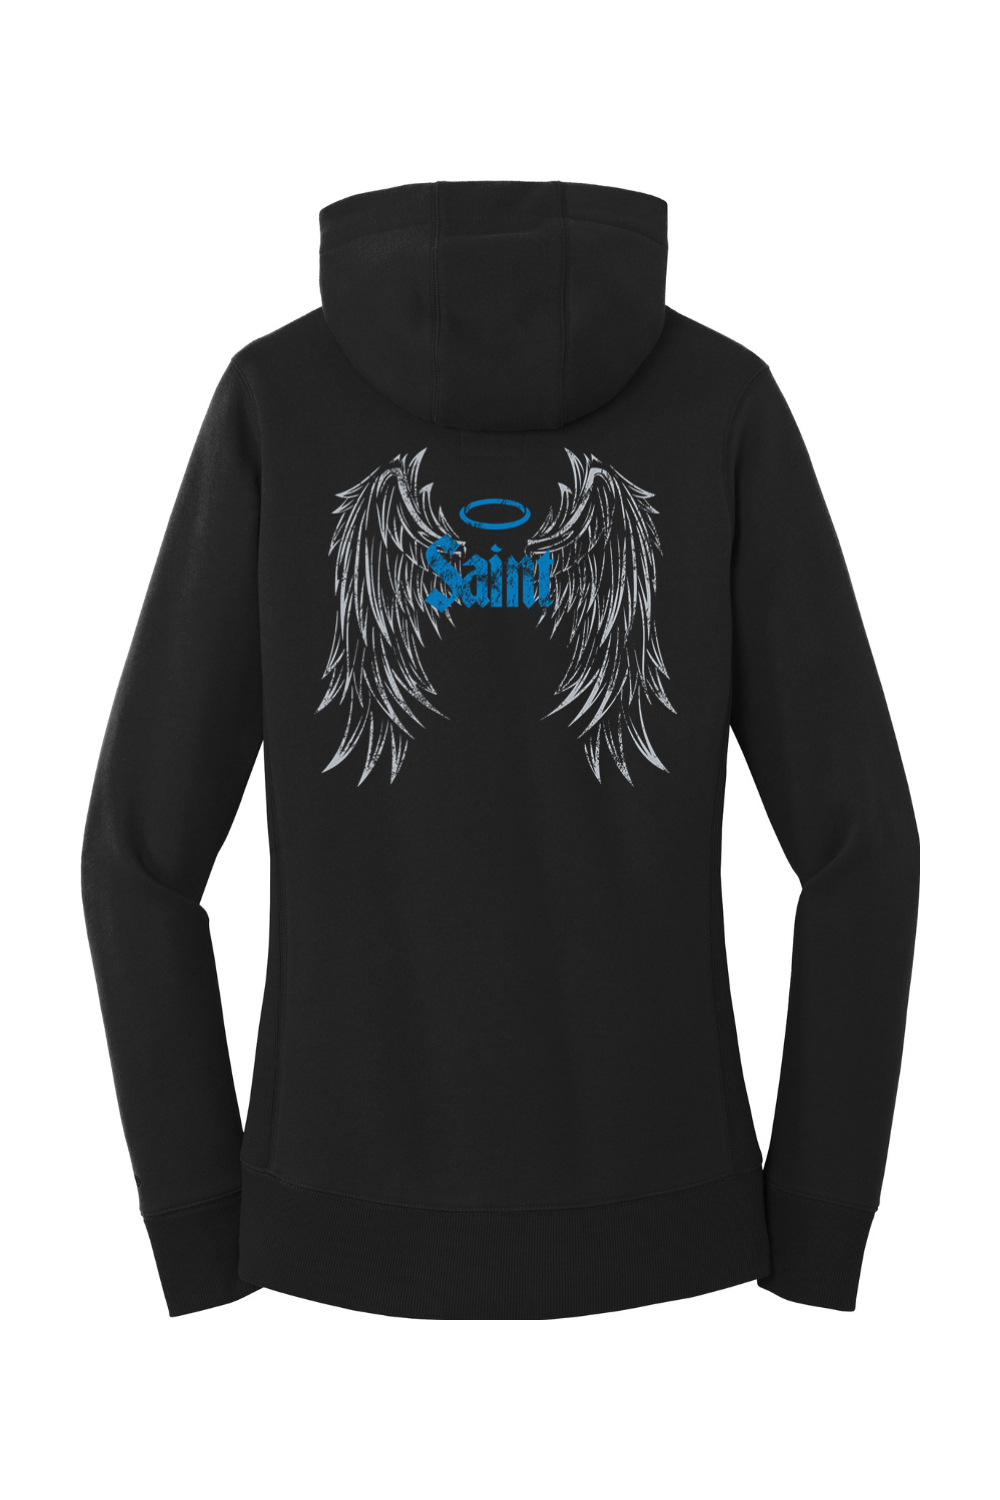 Saint Brown - New Era Ladies French Terry Pullover Hoodie